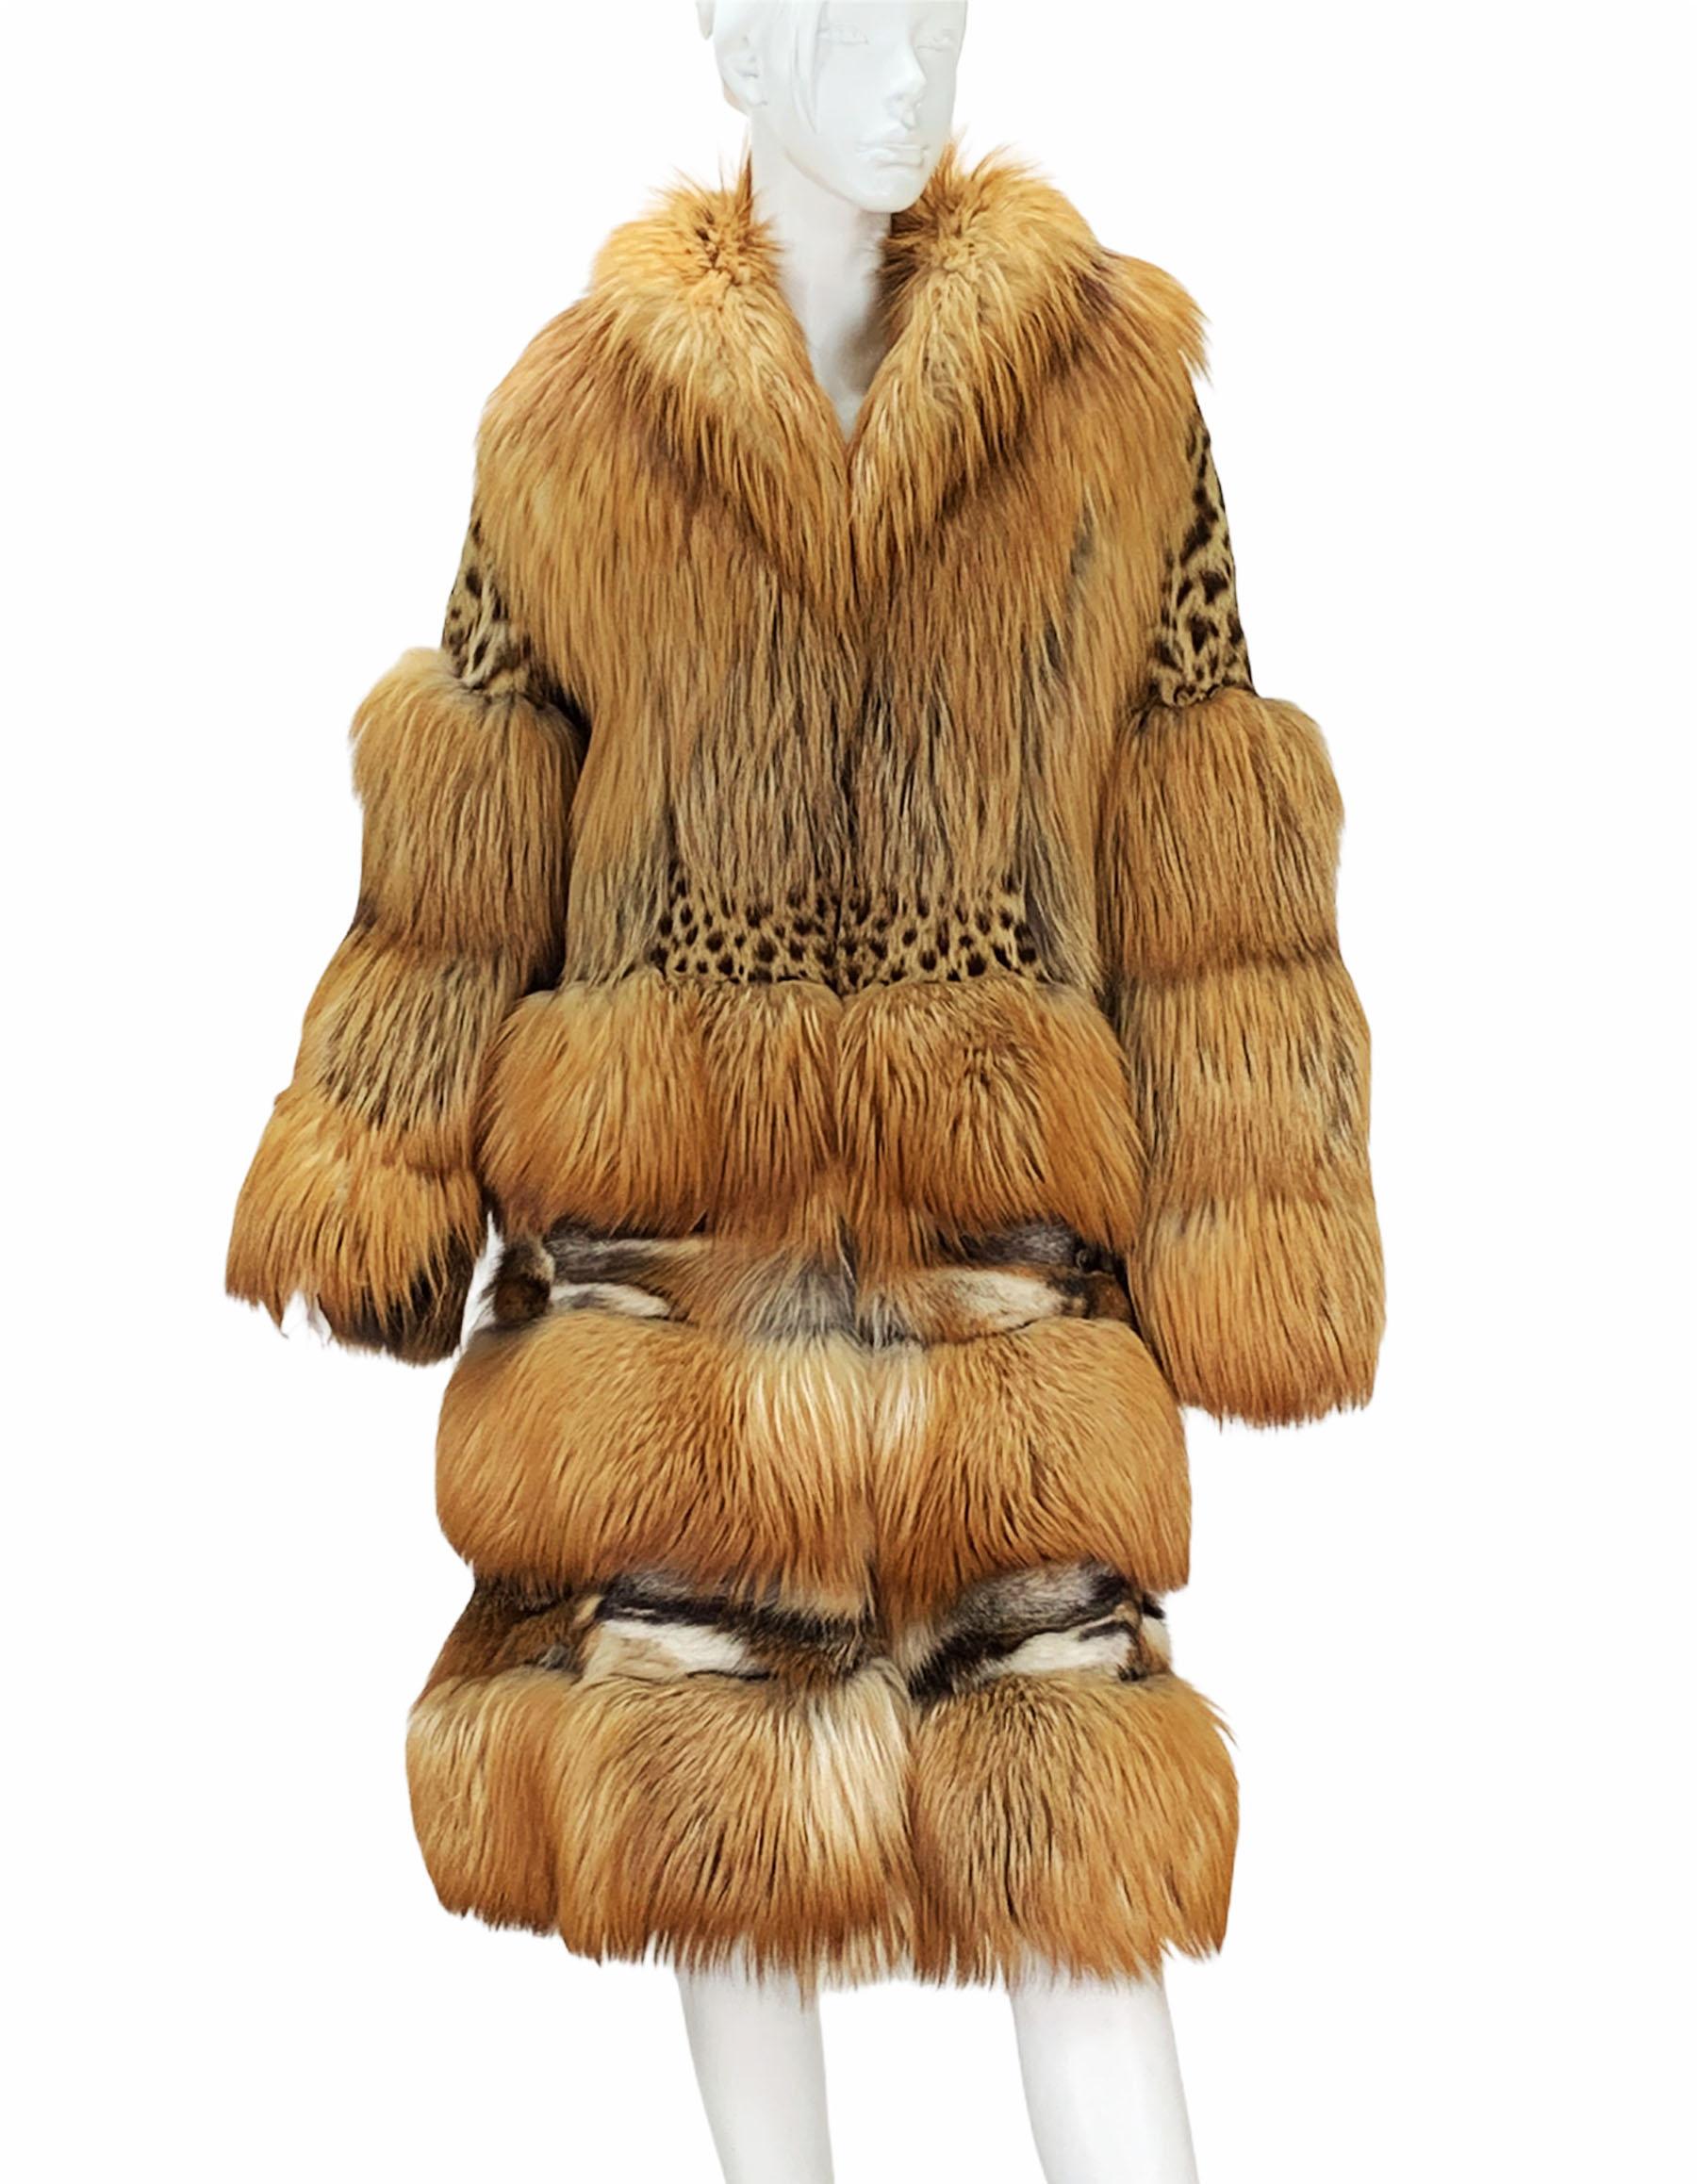 Museum Tom Ford for Gucci Runway F/W 1999 2 in 1 Fur Coat Jacket  For Sale 2